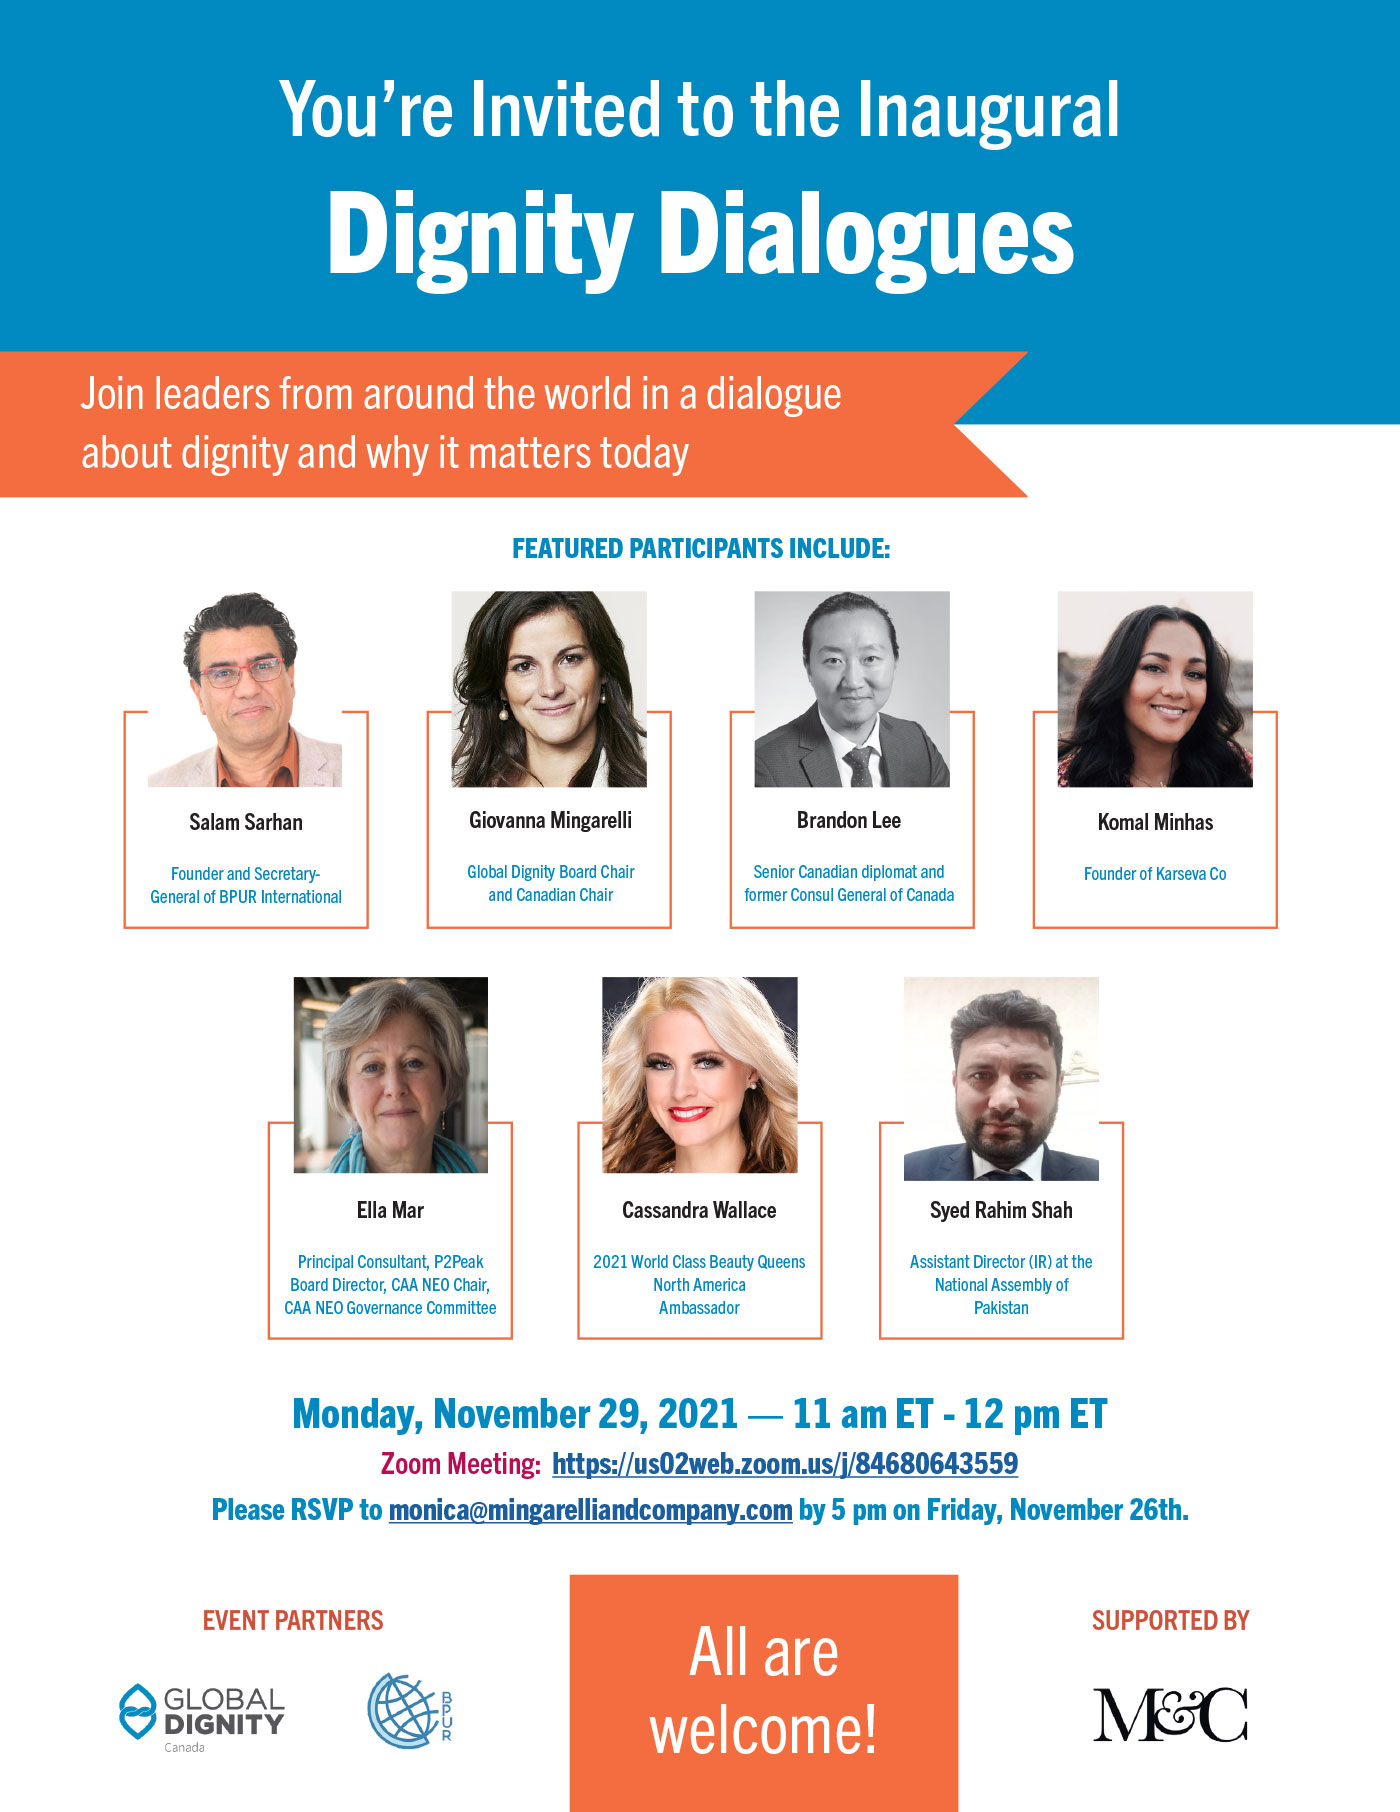 Dignity Dialogues